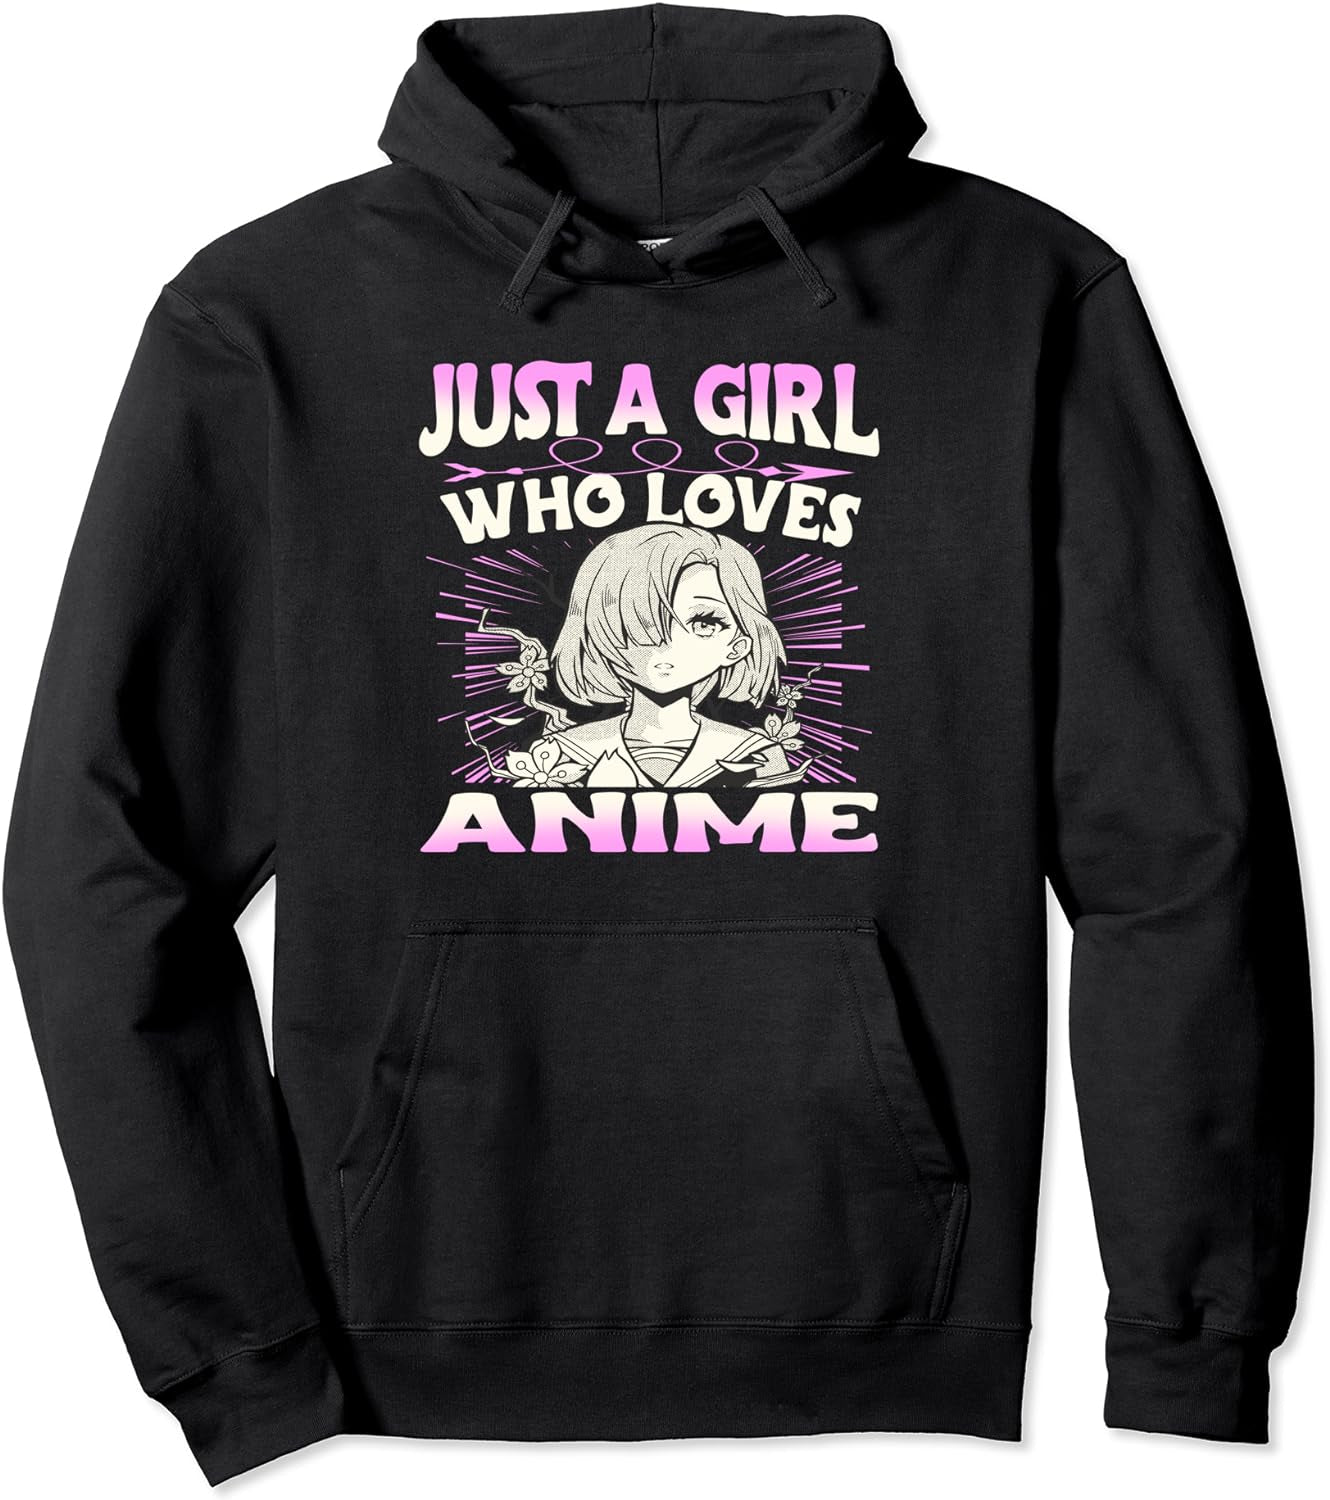 Just a Girl Who Loves Anime Pullover Hoodie